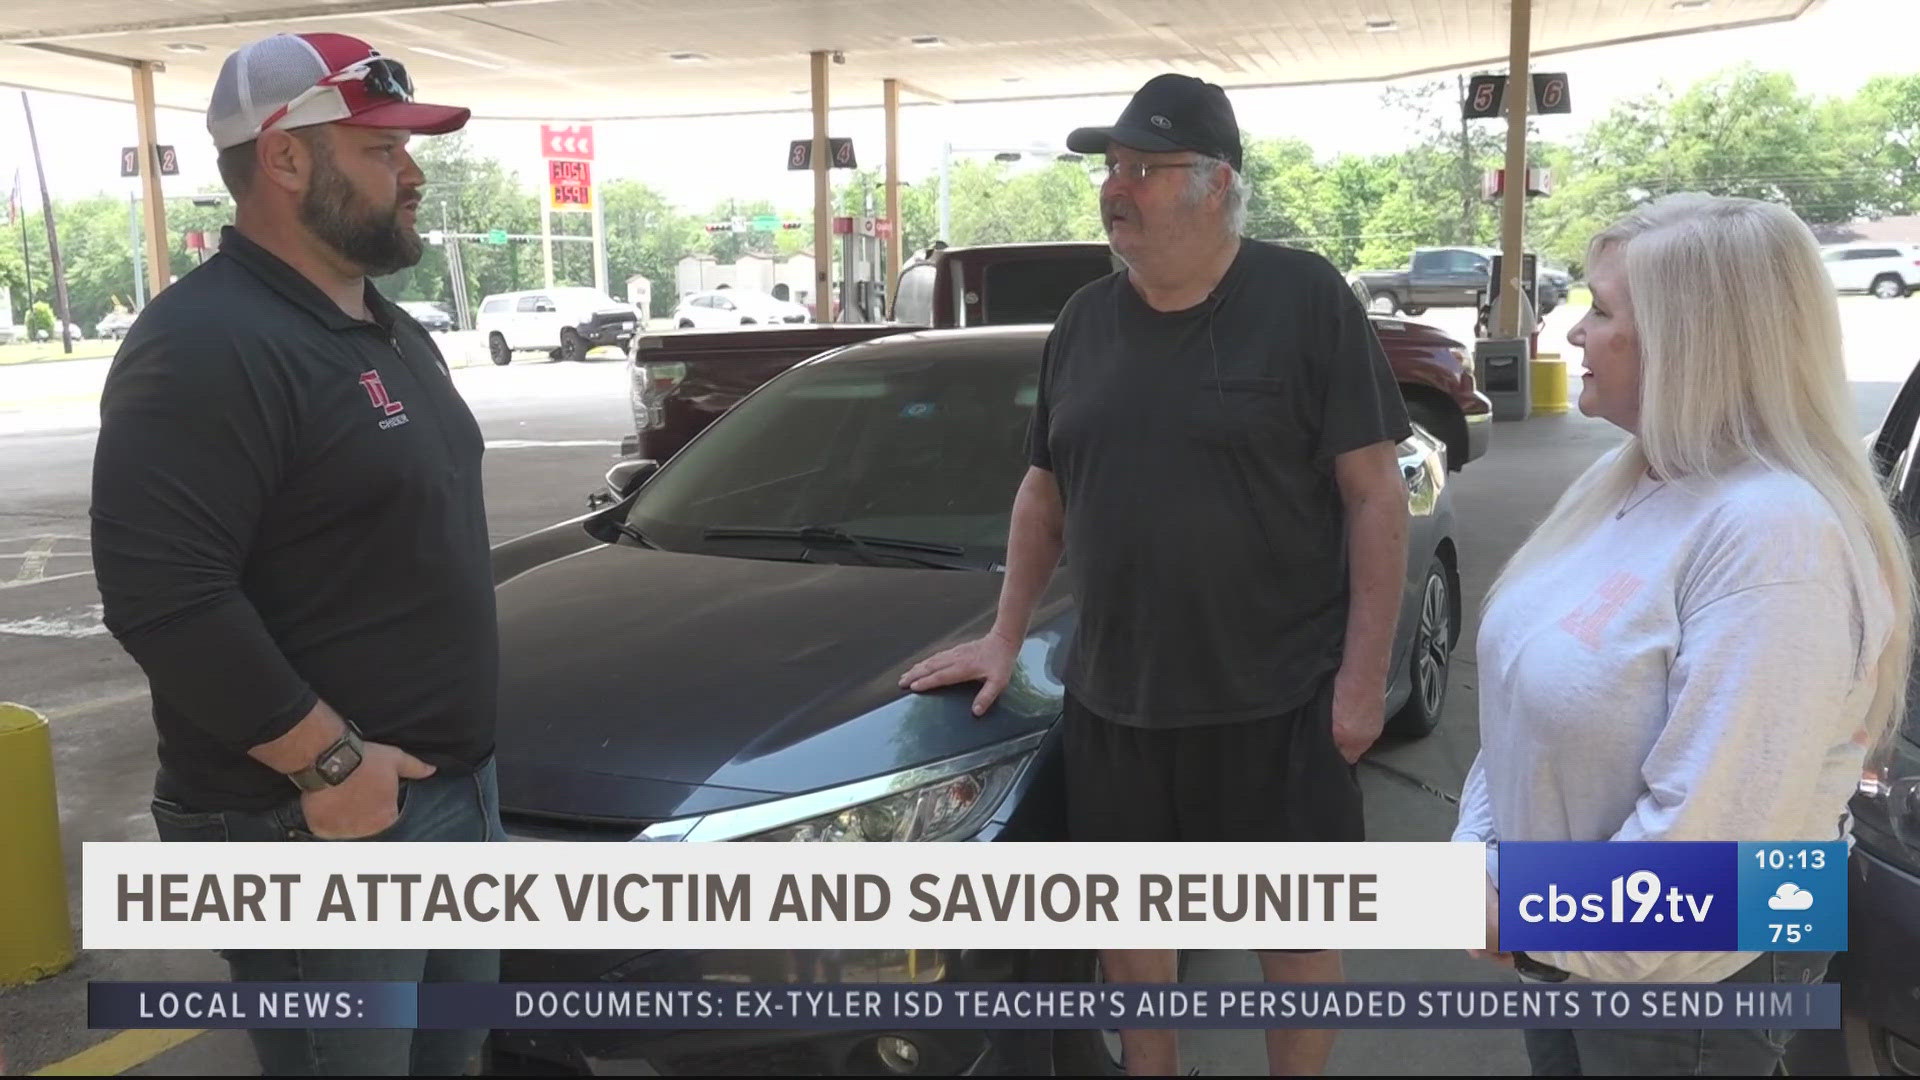 Kenneth Steel suffered a heart attack in April and was able to reunite with at least one of the people who helped save his life in a gas station parking lot.